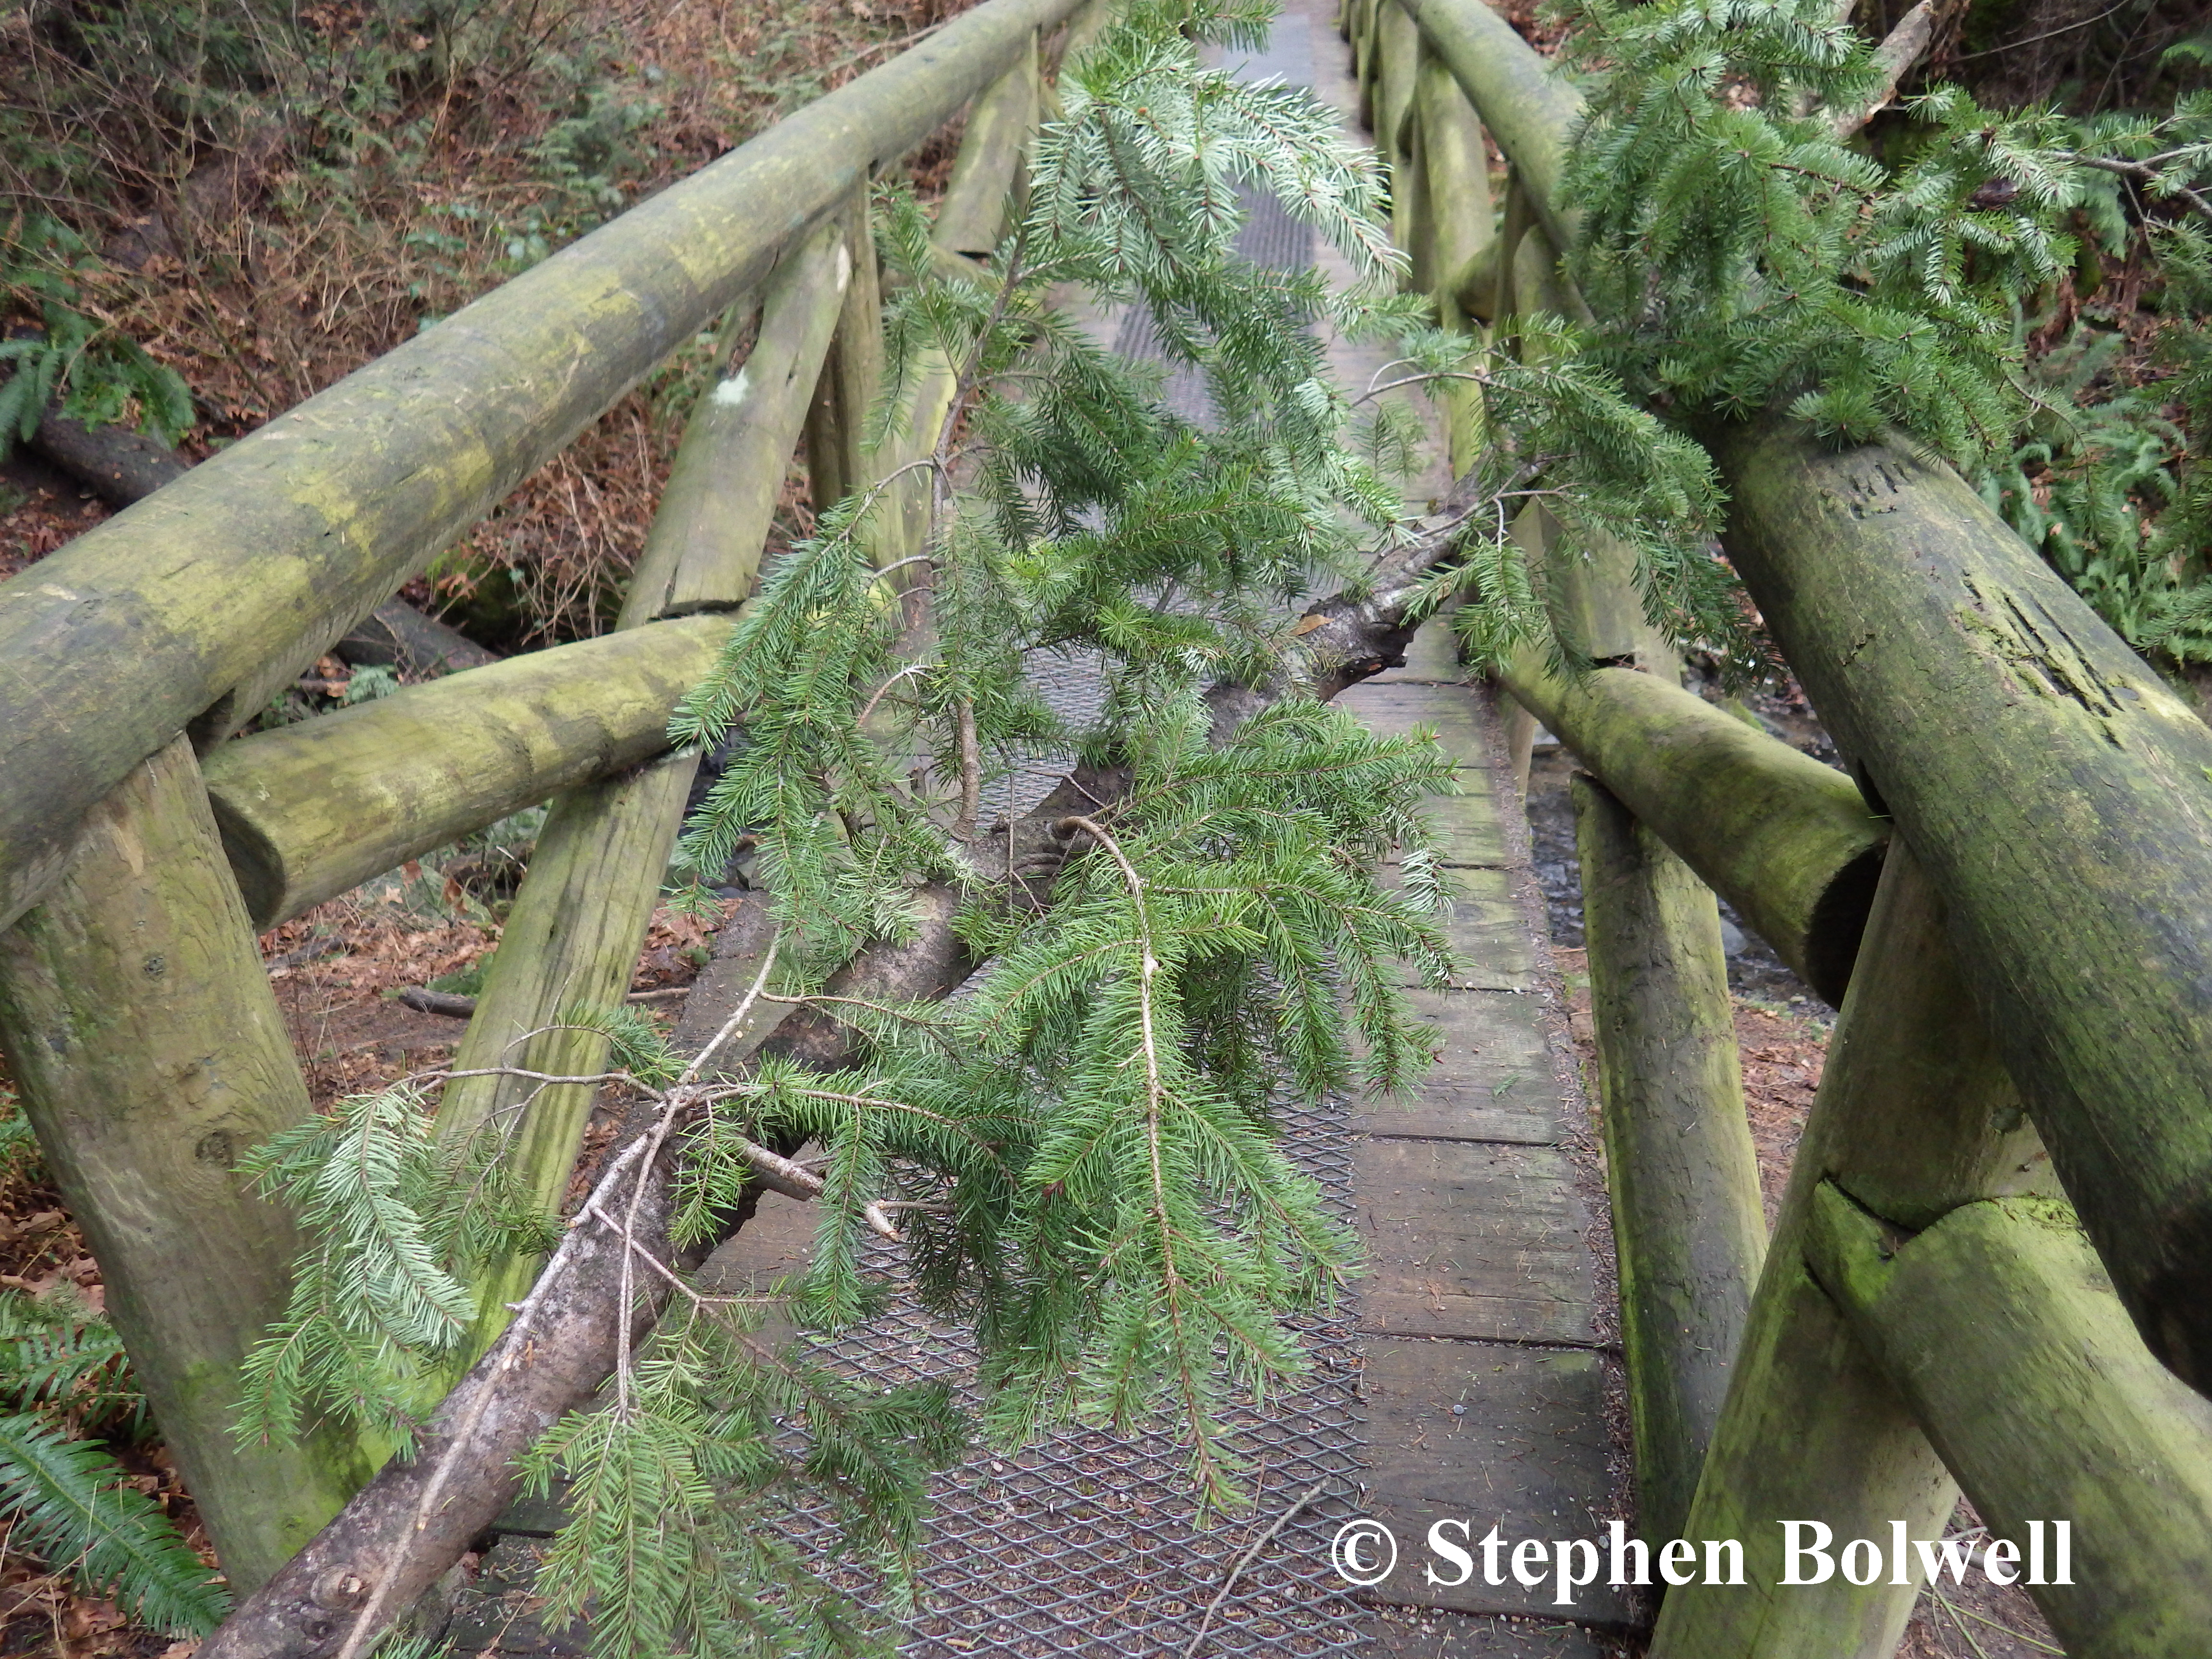 A healthy Douglas fir bough that has splintered and fallen onto a frequently used gully bridge. Had anybody been walking across they might easily have been hit.